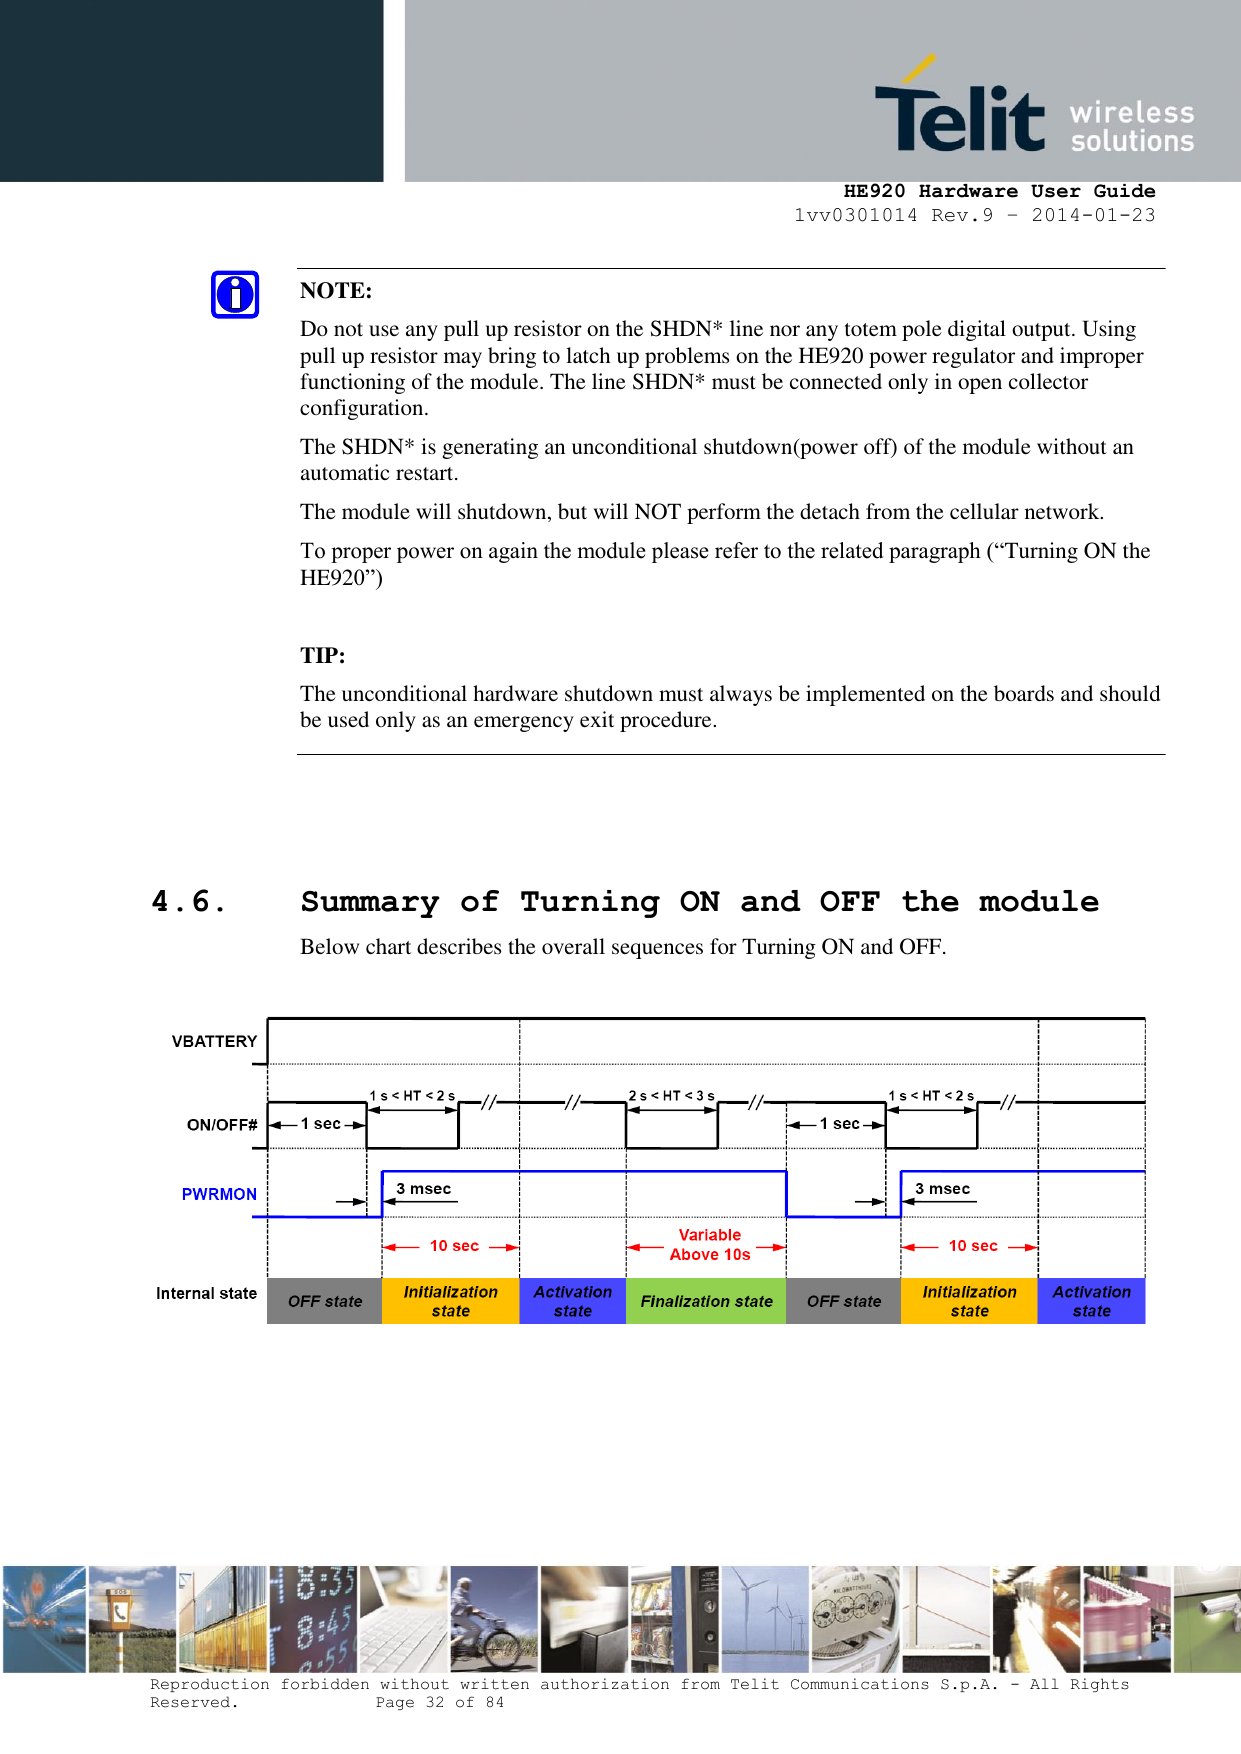     HE920 Hardware User Guide 1vv0301014 Rev.9 – 2014-01-23 Reproduction forbidden without written authorization from Telit Communications S.p.A. - All Rights Reserved.    Page 32 of 84     4.6. Summary of Turning ON and OFF the module Below chart describes the overall sequences for Turning ON and OFF.    NOTE:  Do not use any pull up resistor on the SHDN* line nor any totem pole digital output. Using pull up resistor may bring to latch up problems on the HE920 power regulator and improper functioning of the module. The line SHDN* must be connected only in open collector configuration. The SHDN* is generating an unconditional shutdown(power off) of the module without an automatic restart. The module will shutdown, but will NOT perform the detach from the cellular network. To proper power on again the module please refer to the related paragraph (“Turning ON the HE920”)  TIP:  The unconditional hardware shutdown must always be implemented on the boards and should be used only as an emergency exit procedure. 